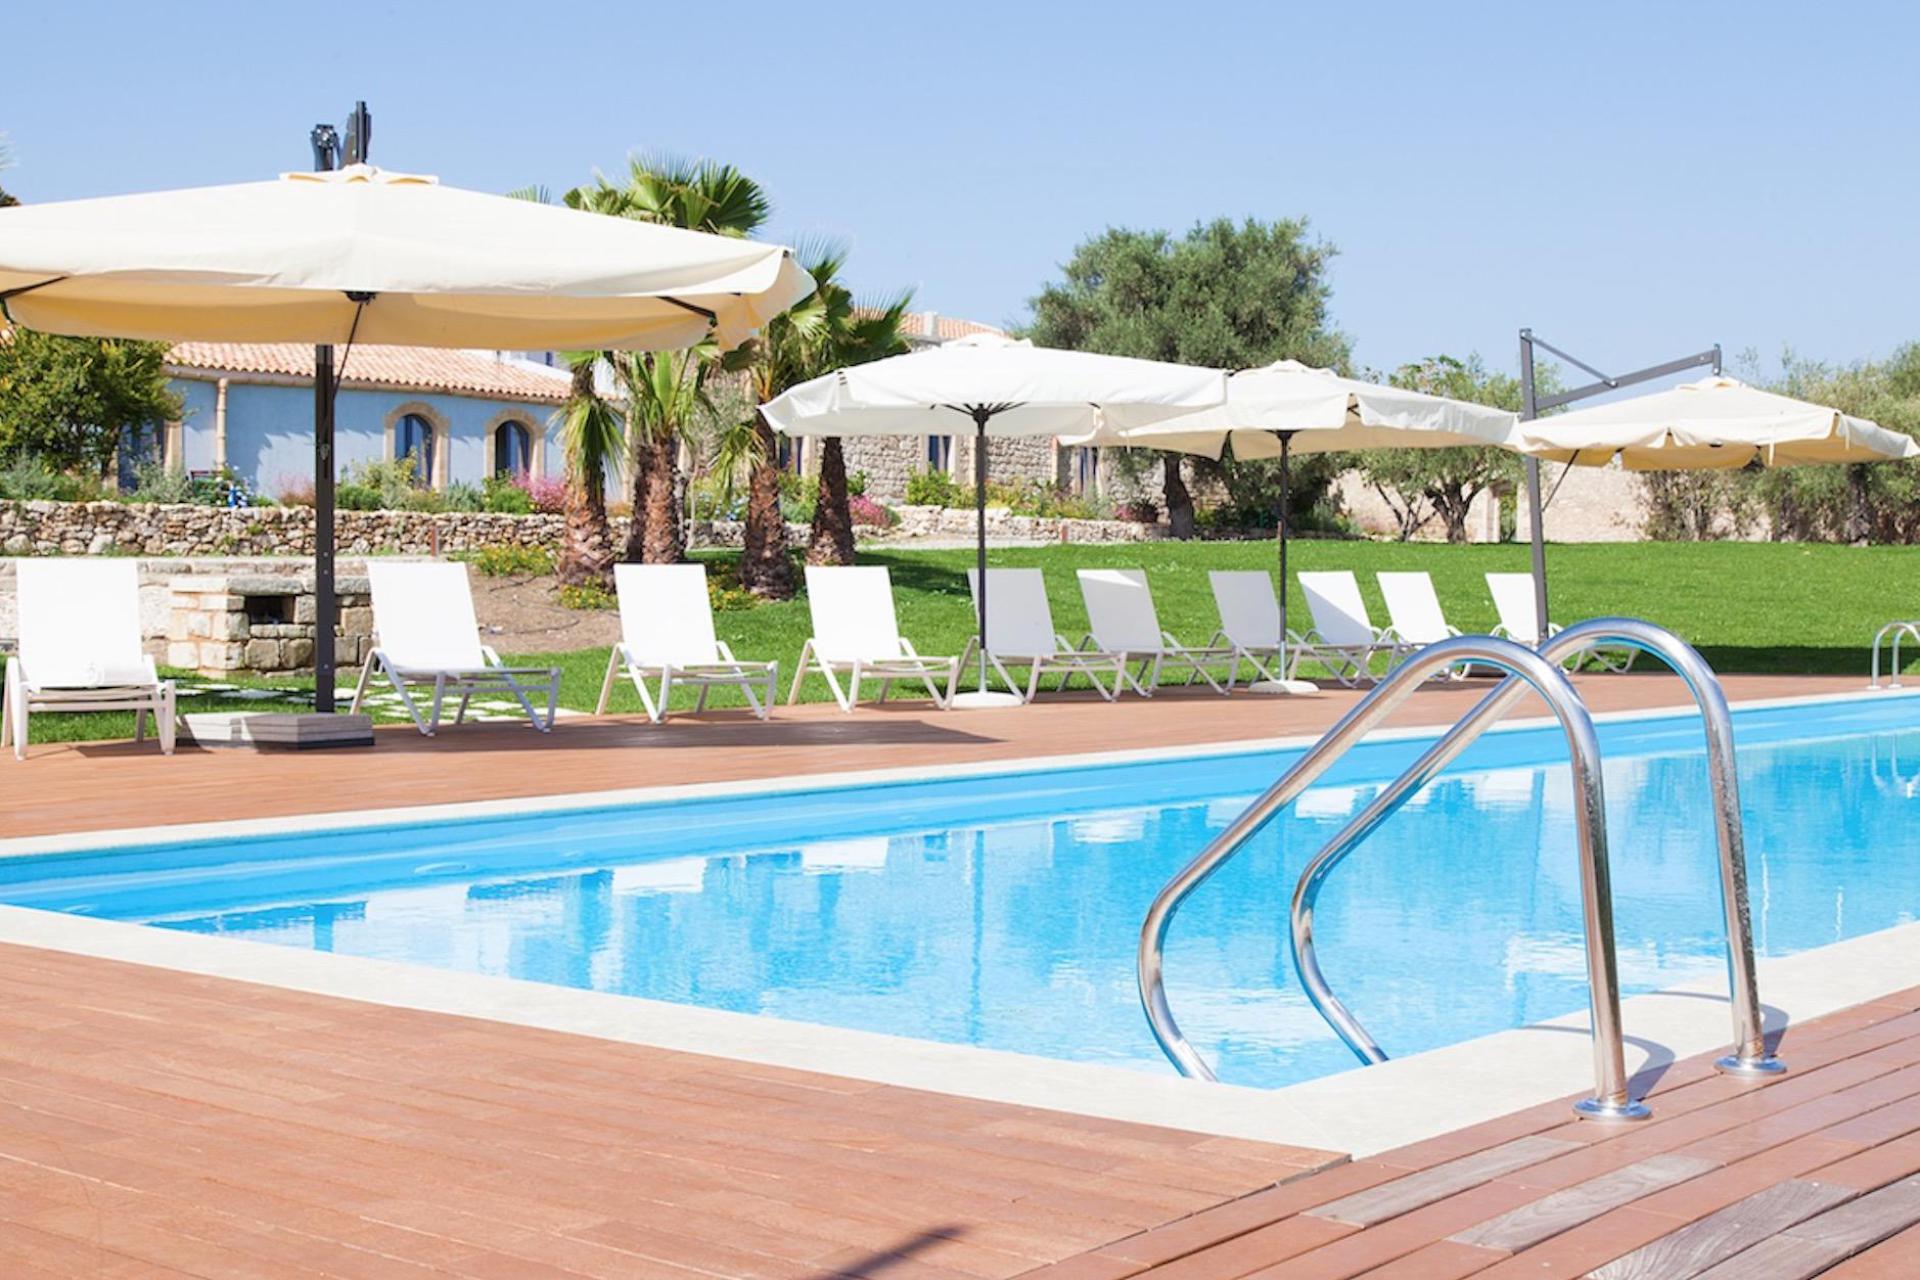 Agriturismo Sicily with spacious apartments